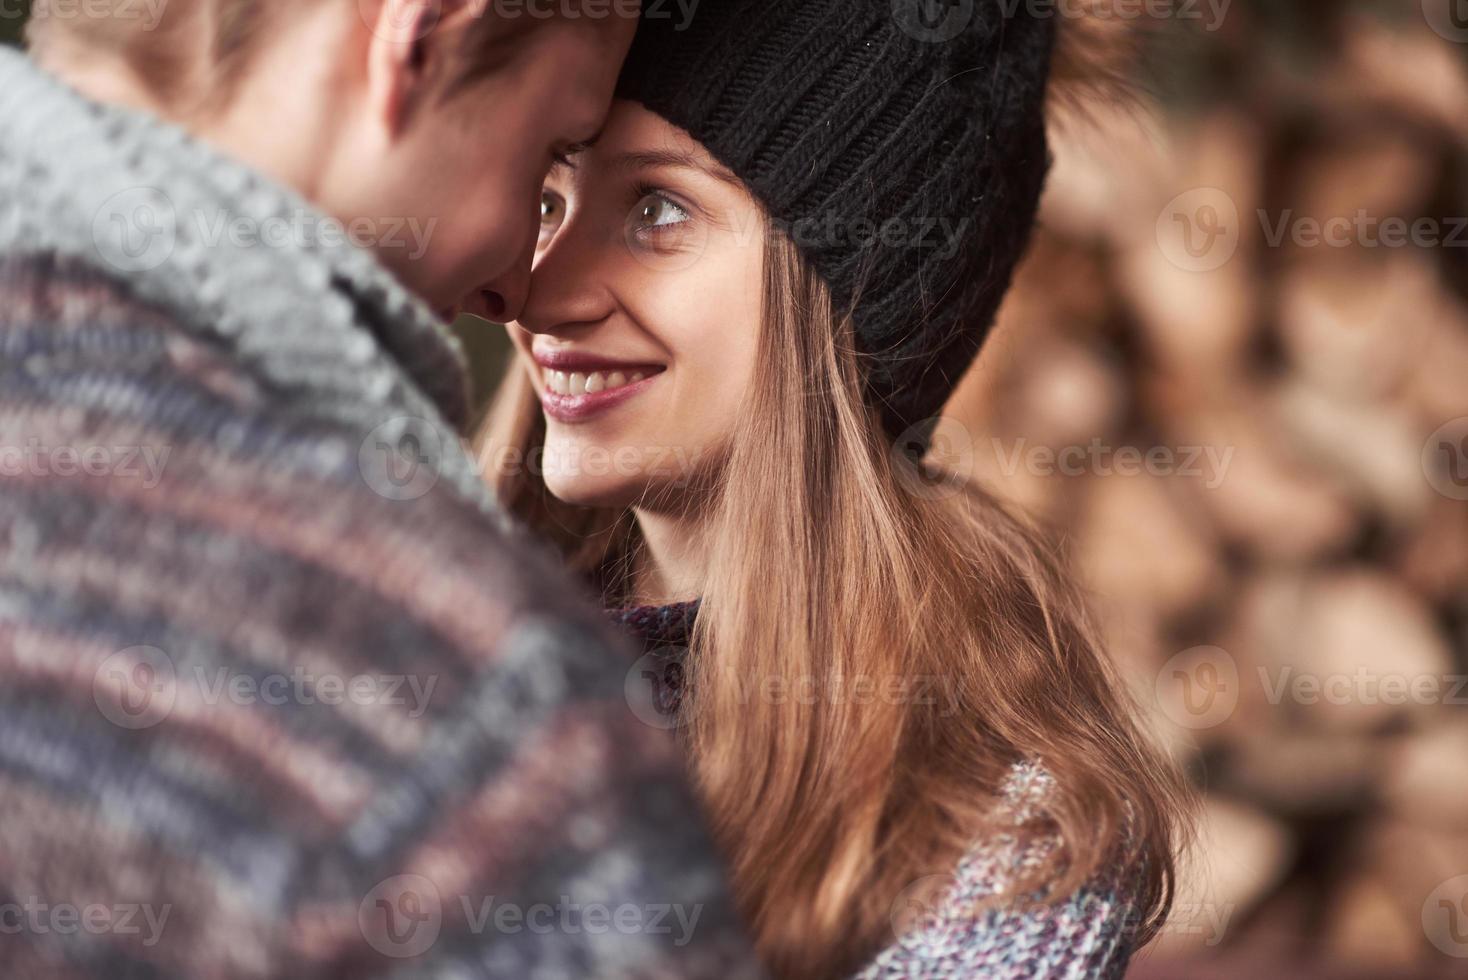 Waist up portrait of carefree young man and woman embracing and smiling. They are standing in winter forest and looking at camera with happiness photo